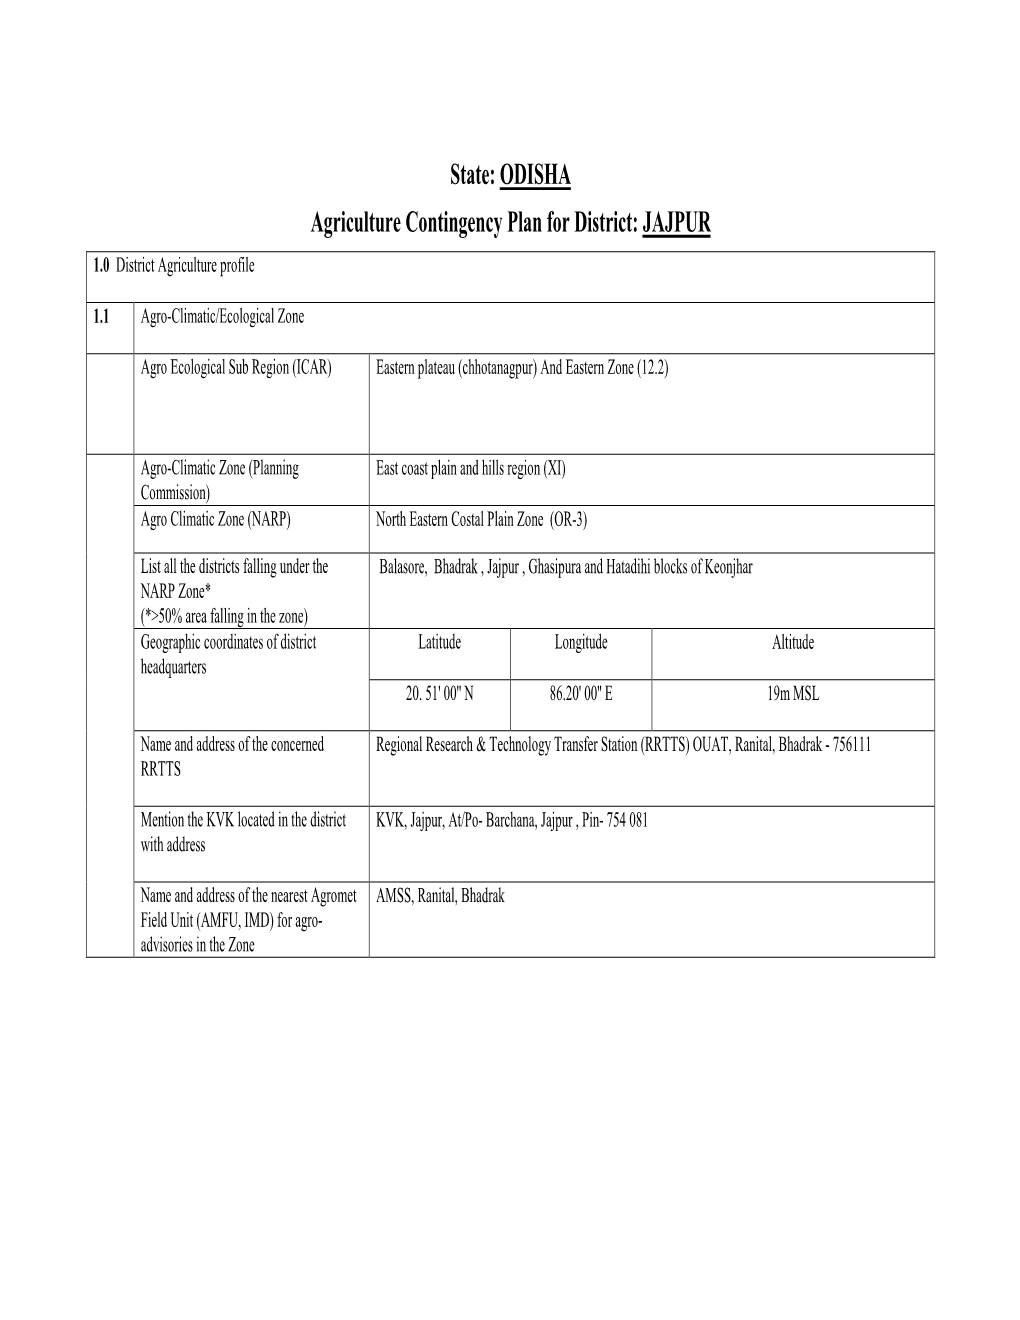 State: ODISHA Agriculture Contingency Plan for District: JAJPUR 1.0 District Agriculture Profile